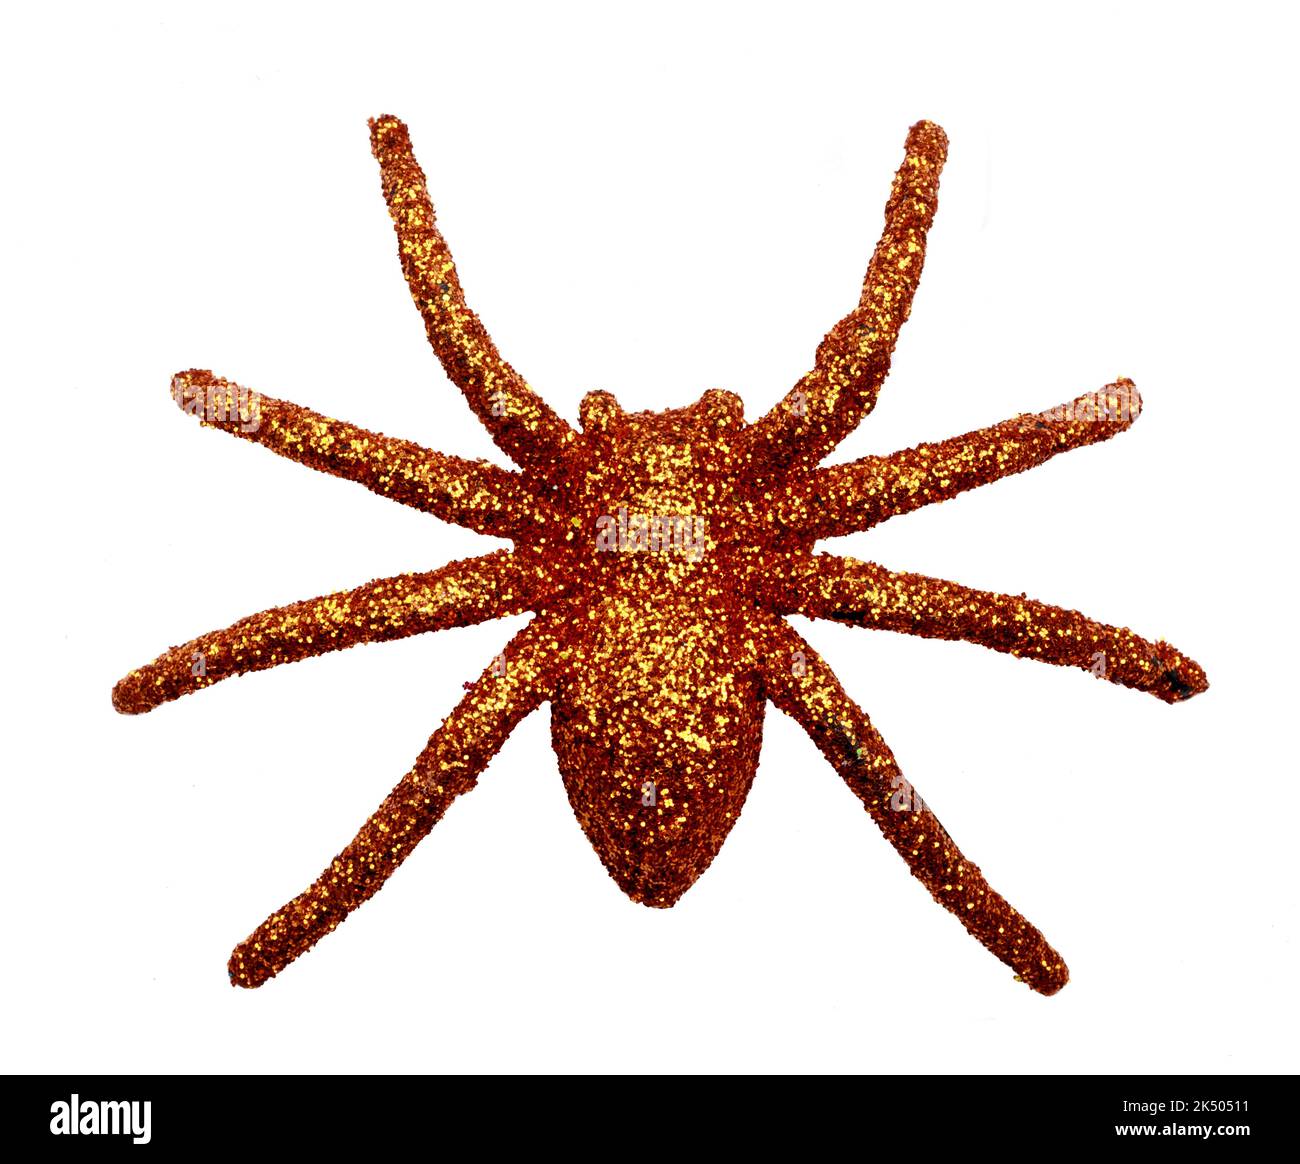 Glitter Gold Spider Halloween Decoration Isolated on White Background Stock Photo